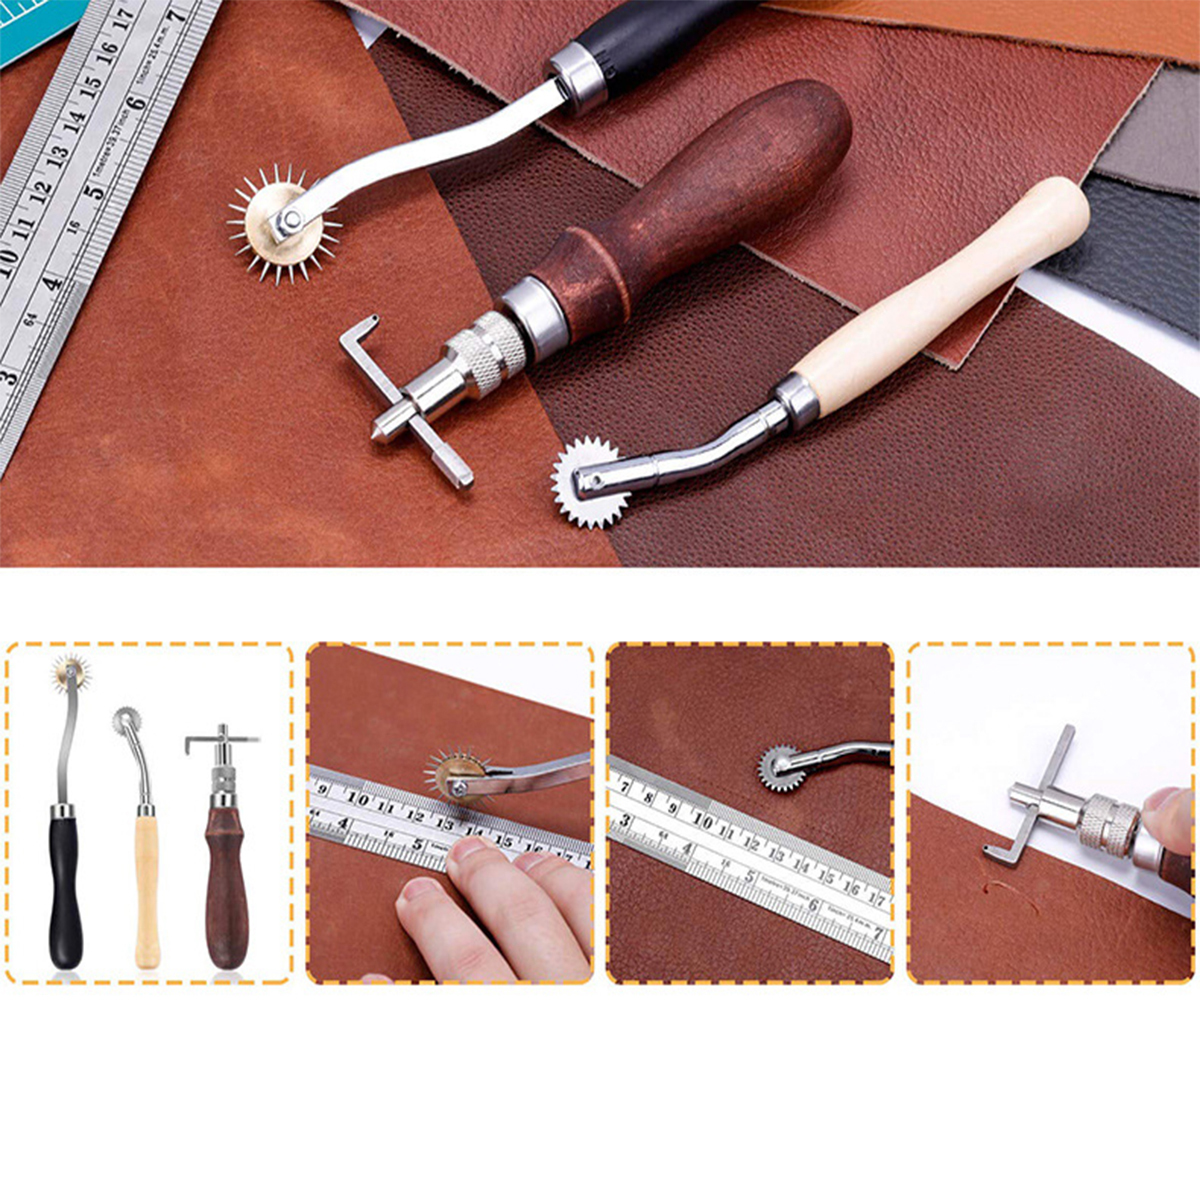 14Pcs-Professional-Leather-Craft-Working-Tools-Kit-for-Hand-Sewing-Tools-DIY-1902746-13